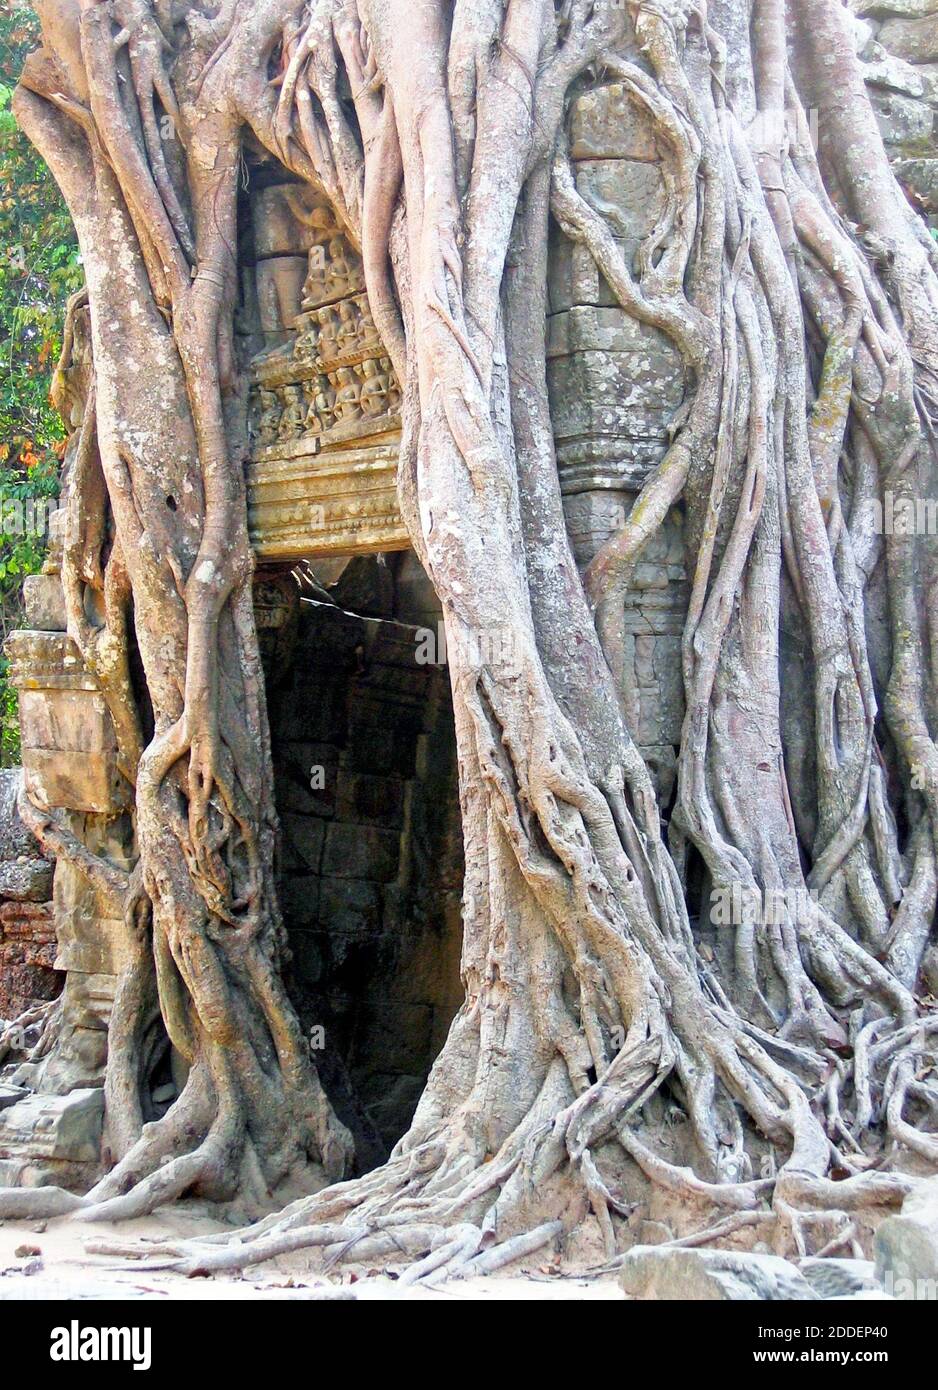 In 2005, strangular figs in Ta Prohm take control of a walkway in the bas-relief decorated ancient temple grounds.  Strangler figs, known as ficus strangulosa, can be found throughout Ta Prohm and other Angkor ancient locations.  These ancient ruins are  testament to the Khmer culture and architecture which was a thriving area covering more than 400 acres.  It was abandoned in 1431, rediscovered in the 1990s, and is a thriving tourism site in the Siem Reap, Cambodia area. Stock Photo